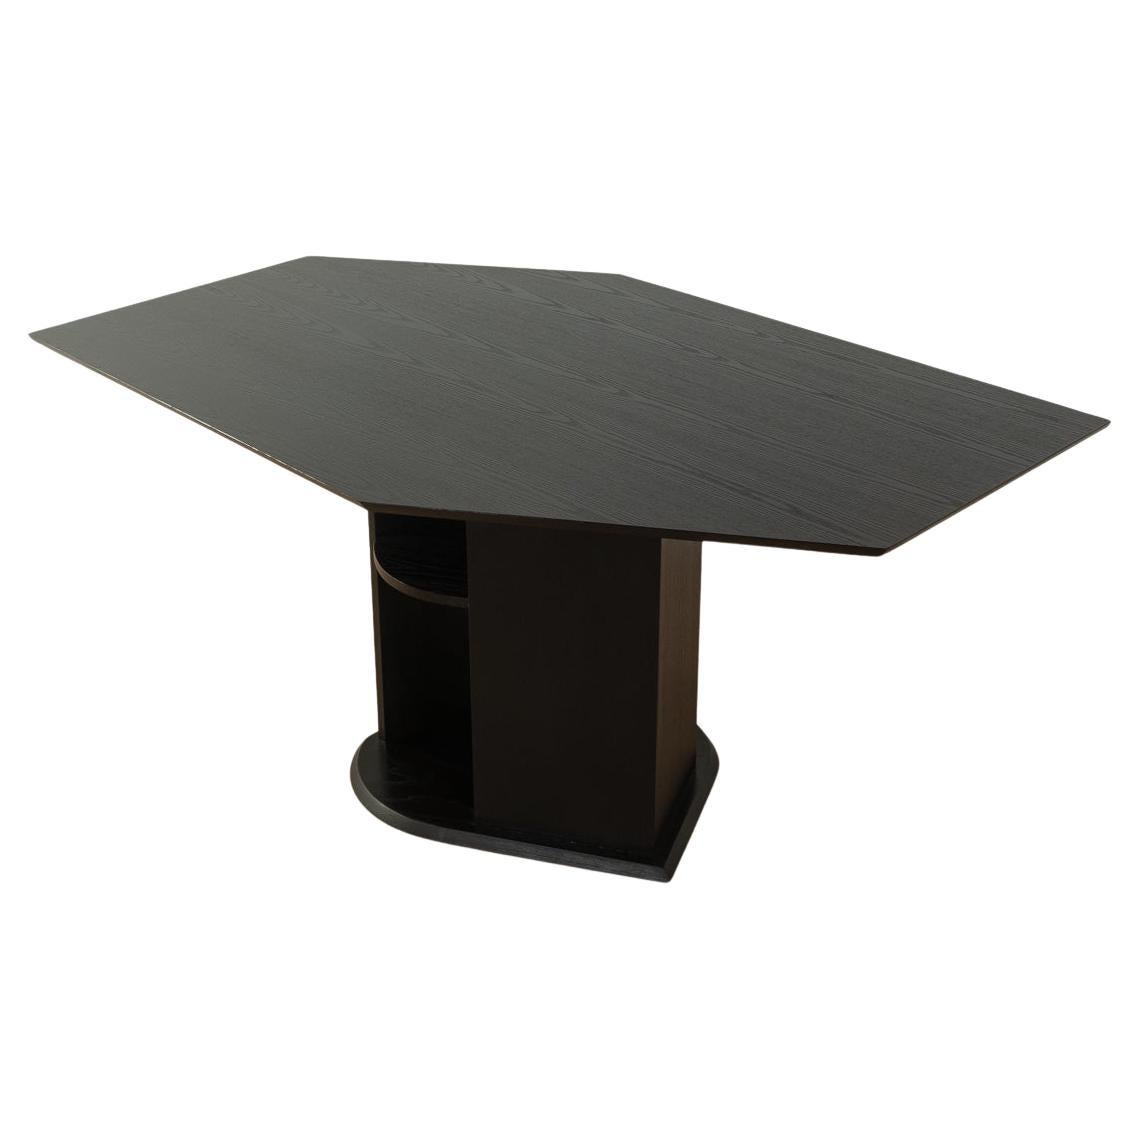  Postmodern dining table  For Sale